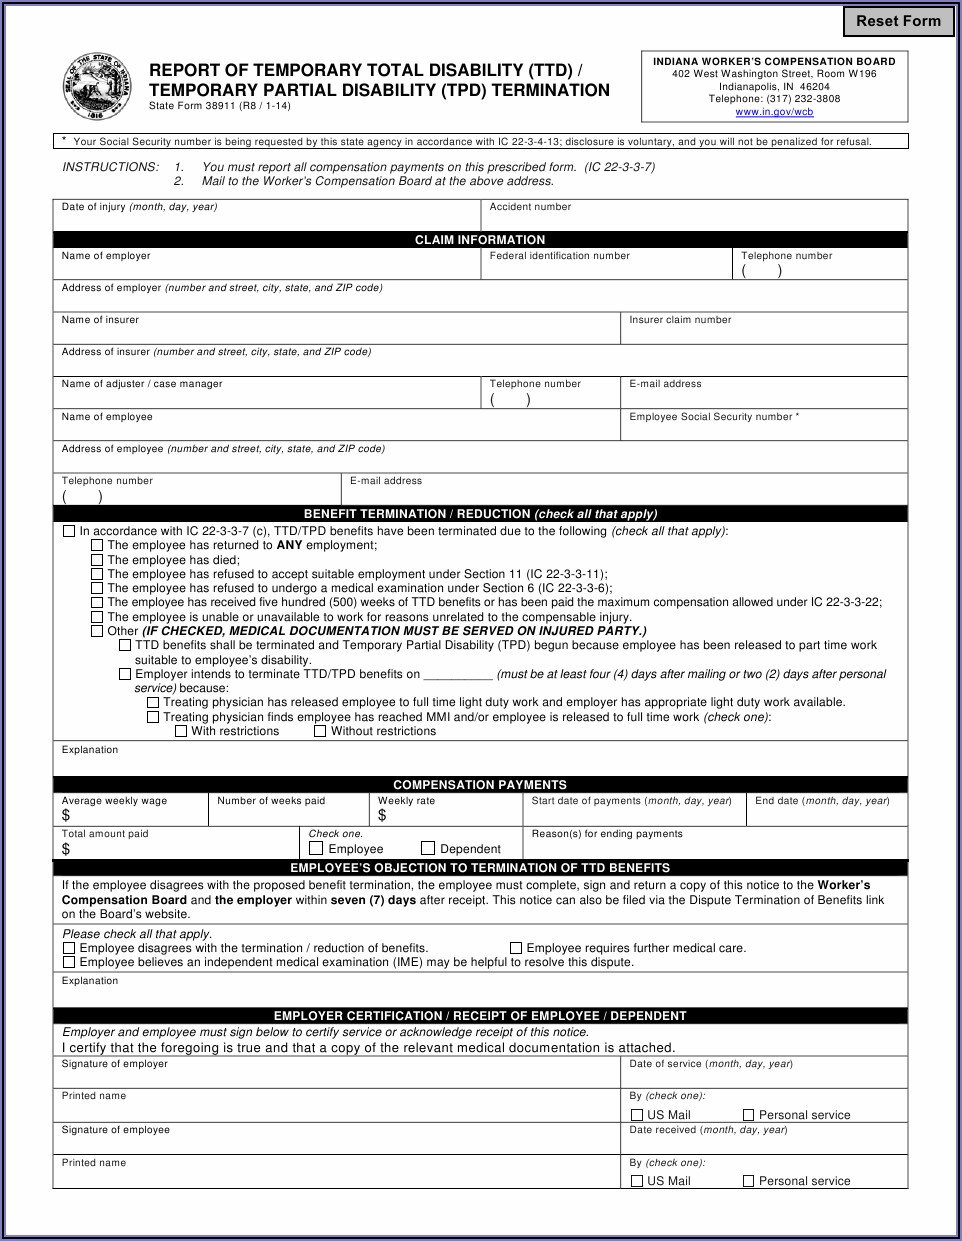 Indiana Workers Compensation Form 38911